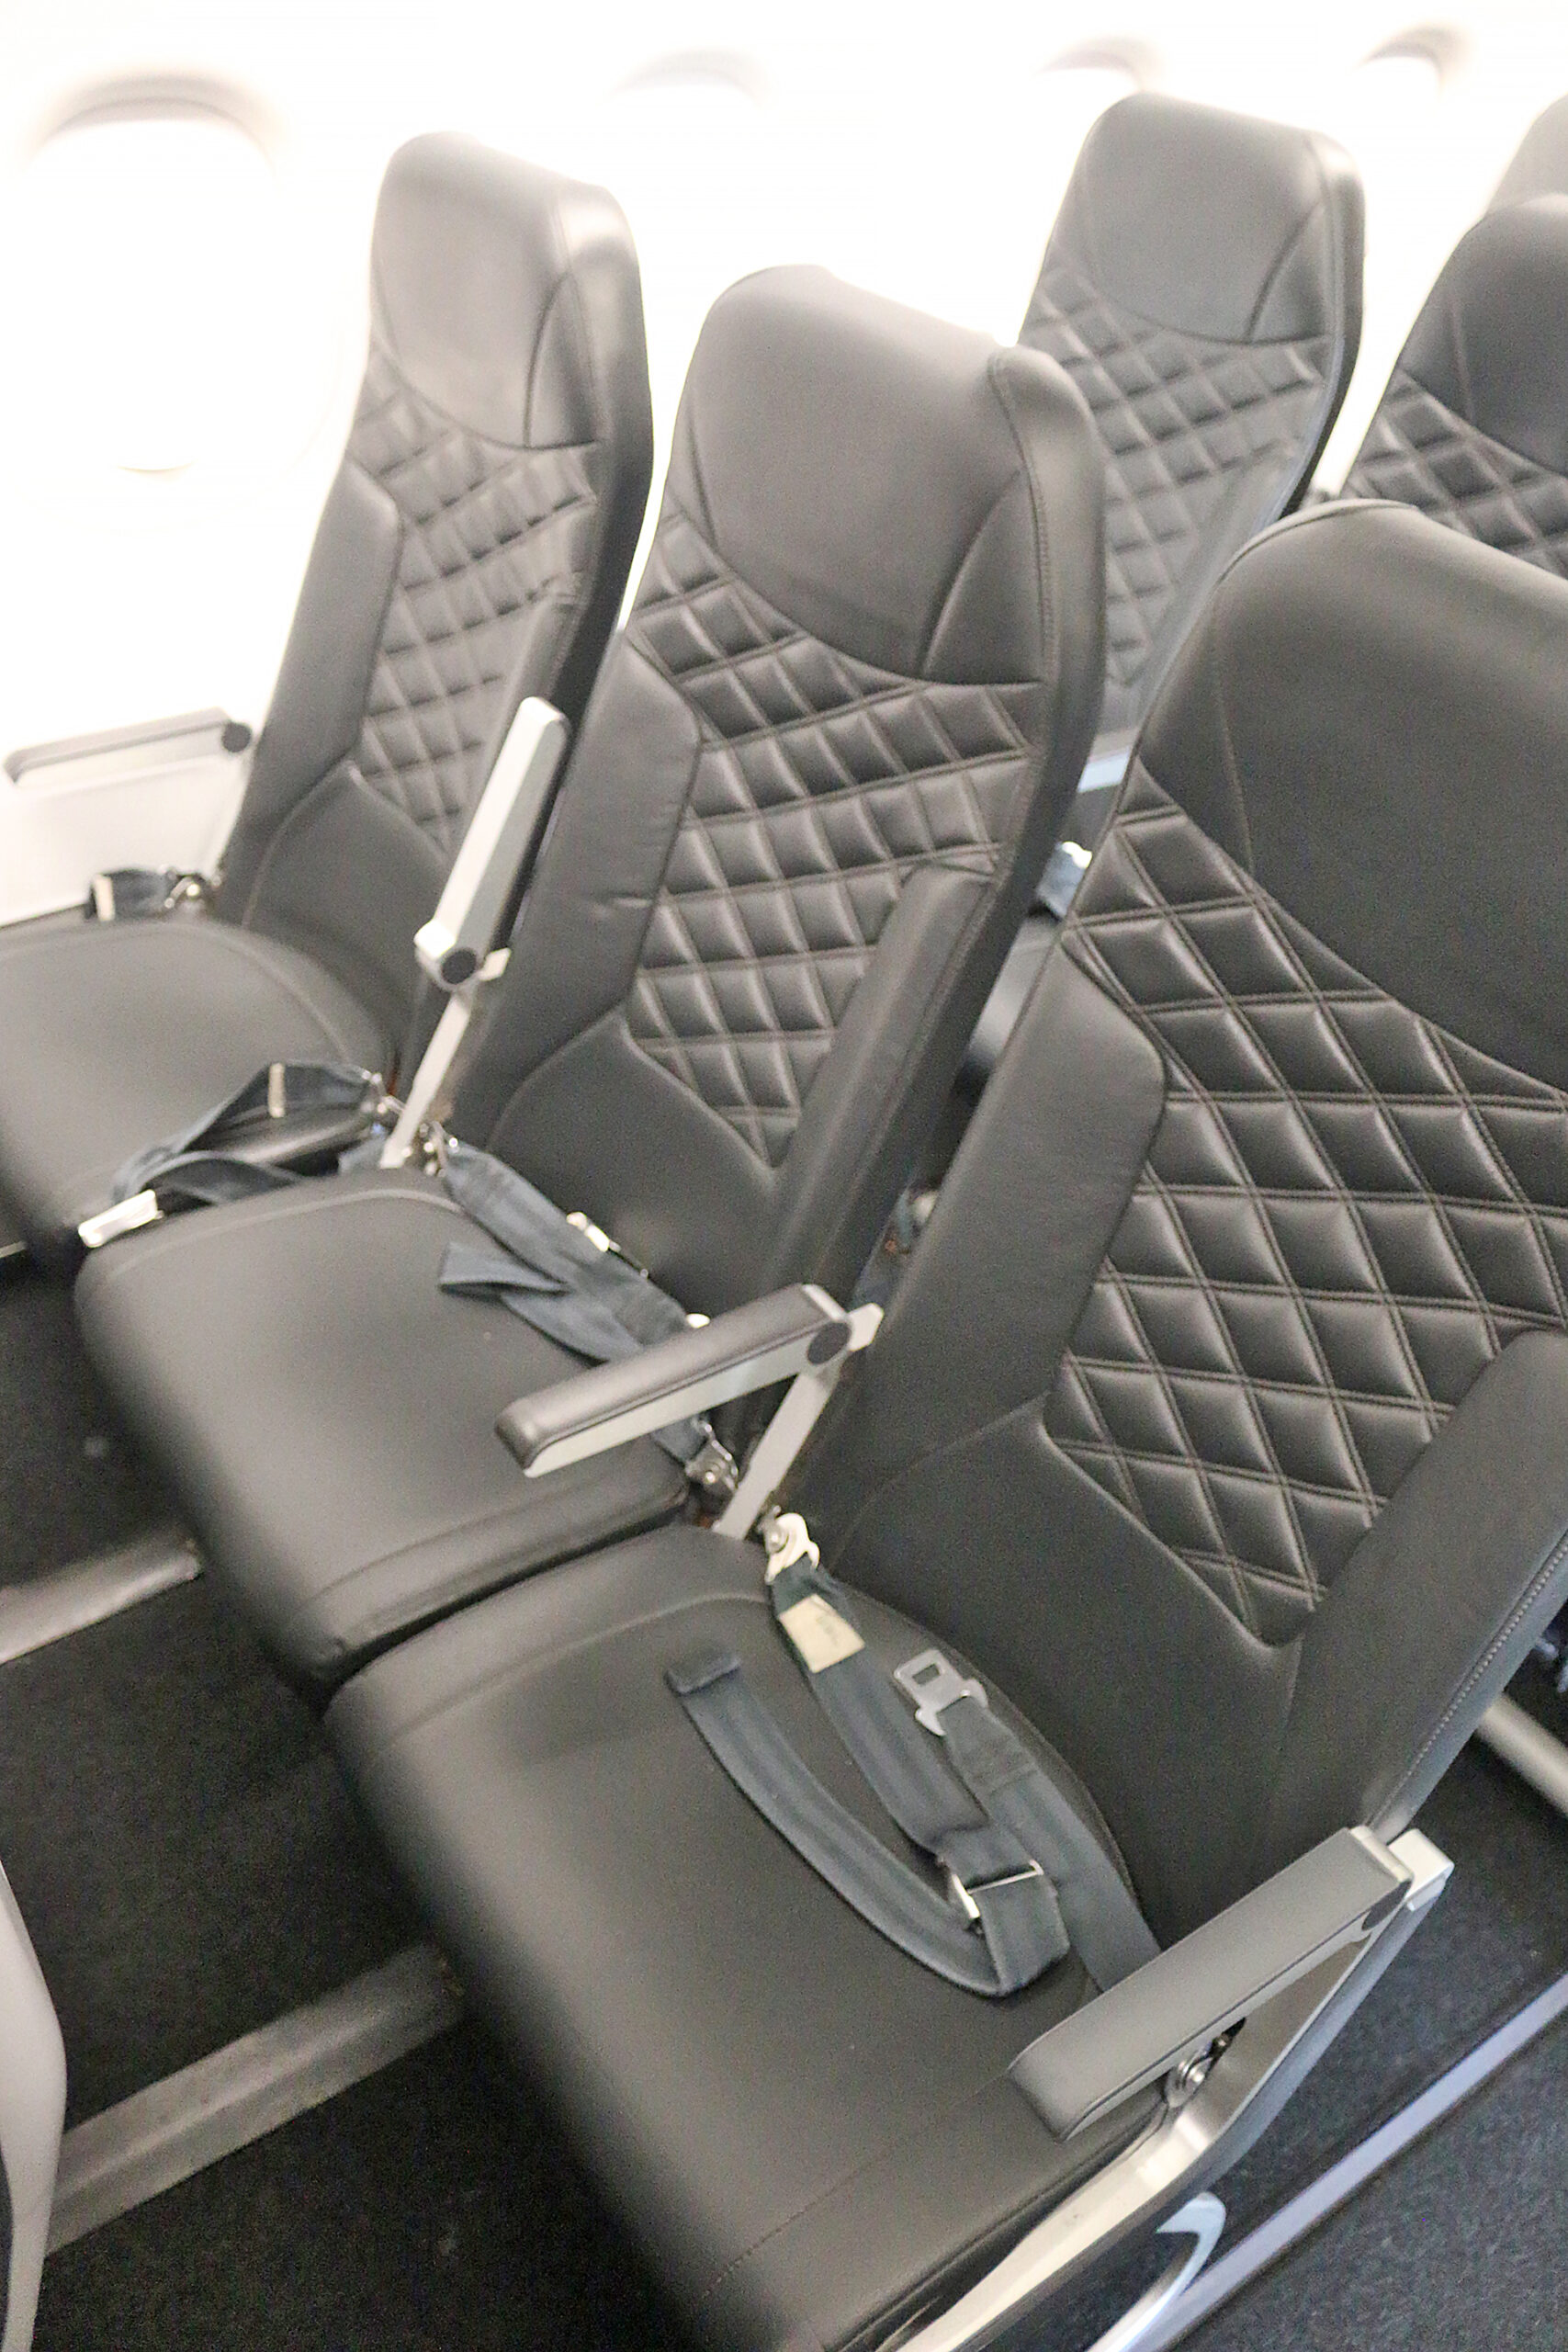 Frontier Airlines seat